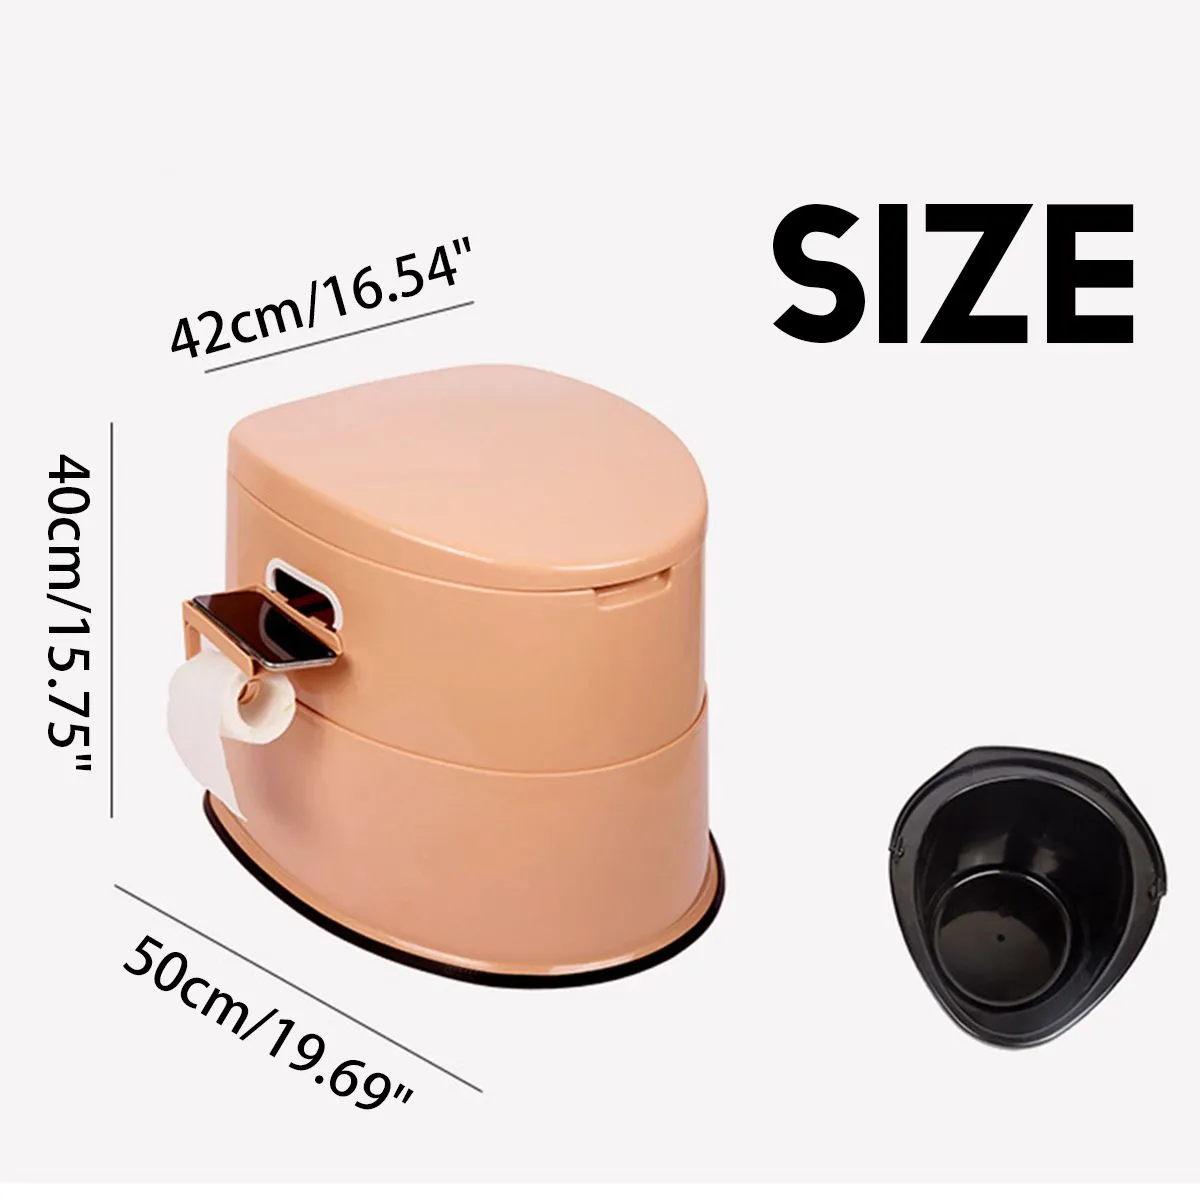 Portable Toilet Squatting Elderly Toilet Stool/Pregnant or Disabled Movable Toilet/ Potty for the Elderly Travel Outdoor Camping